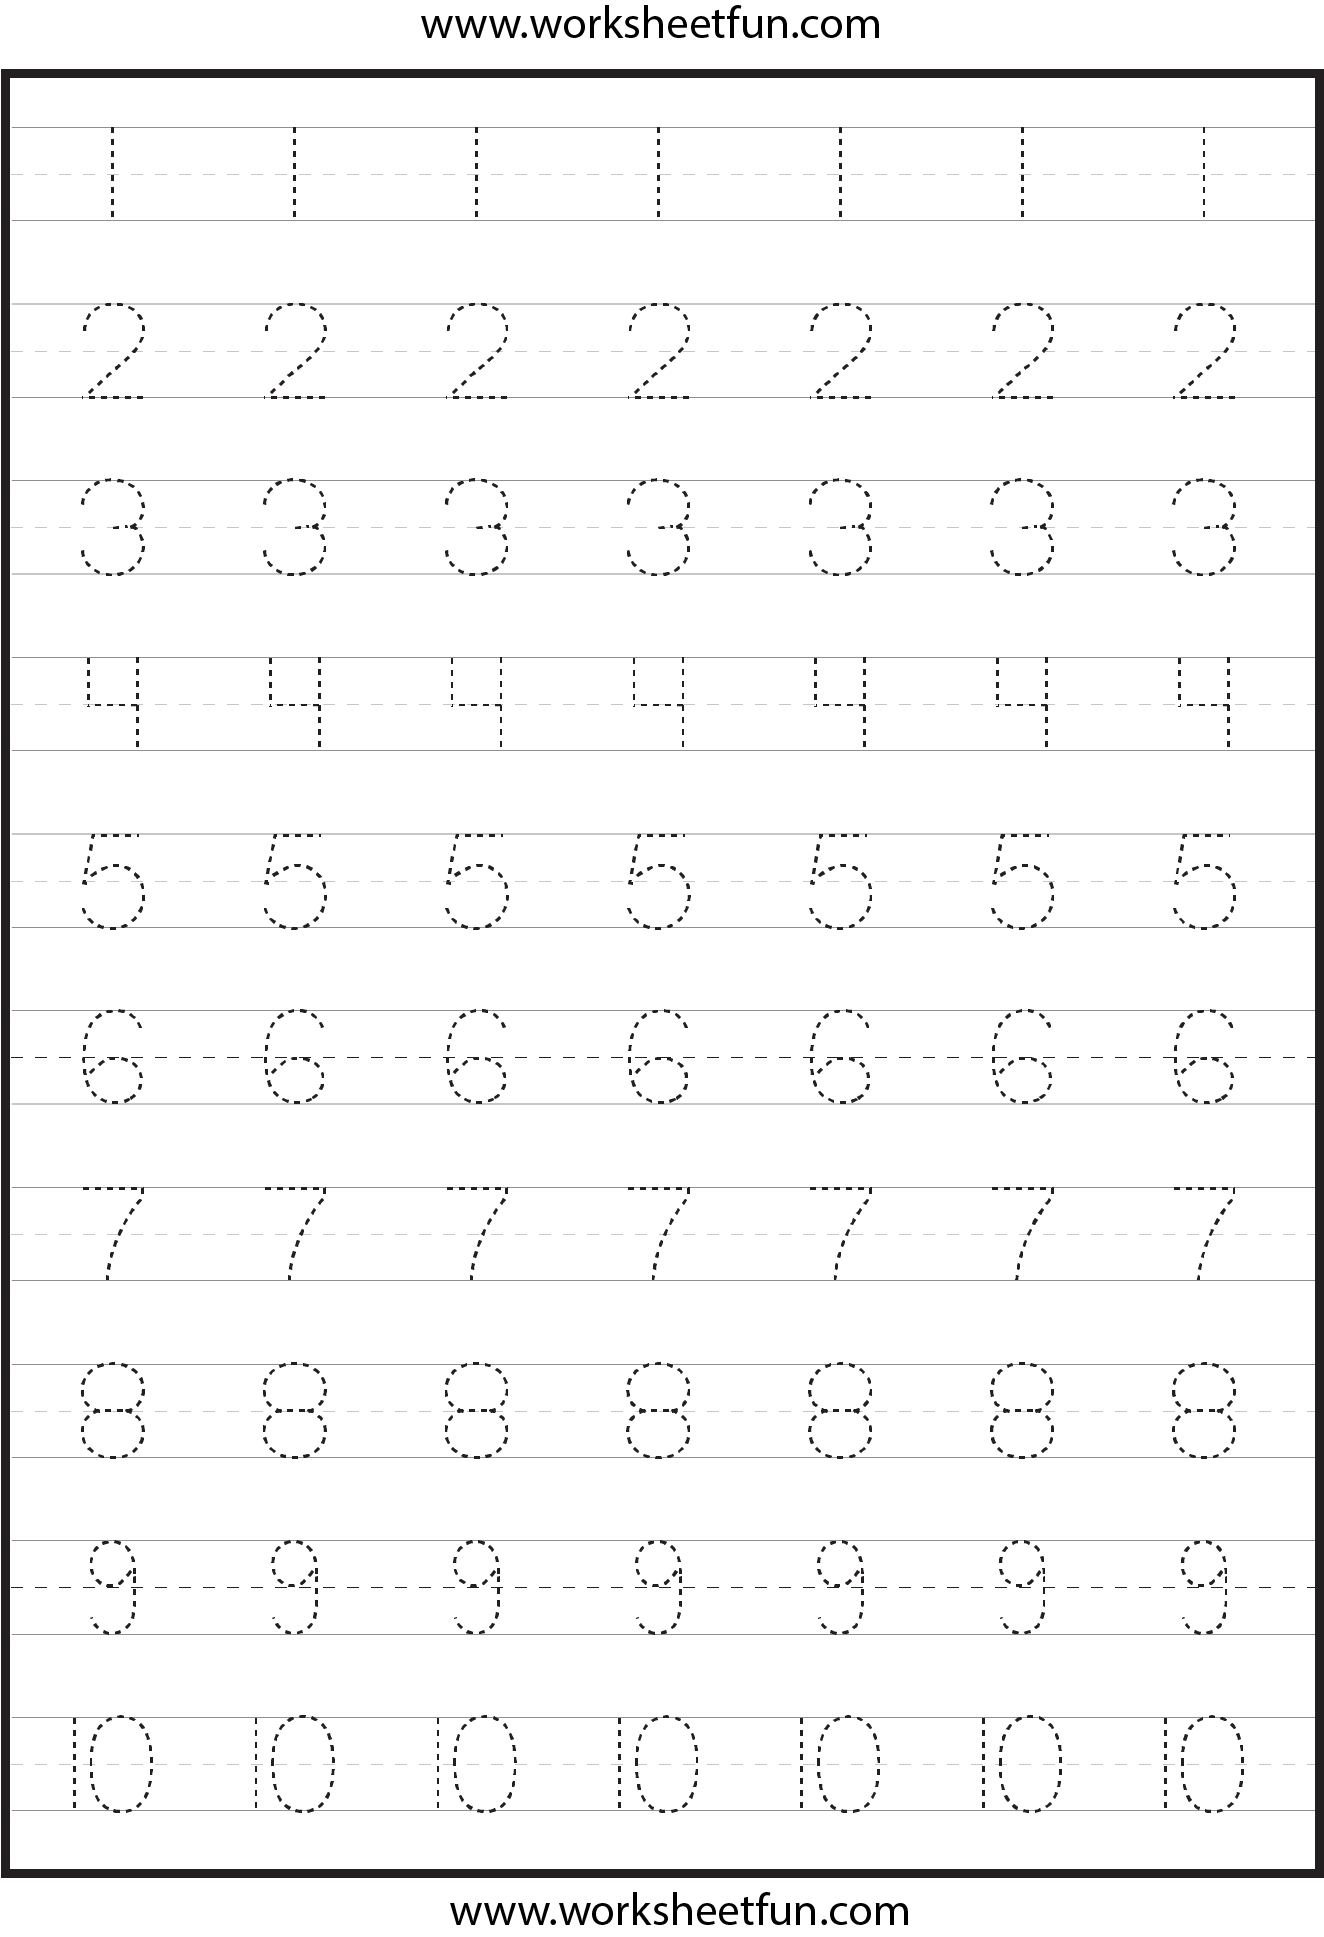 8 Best Images of Follow The Lines Pattern Worksheet - Printable Numbers